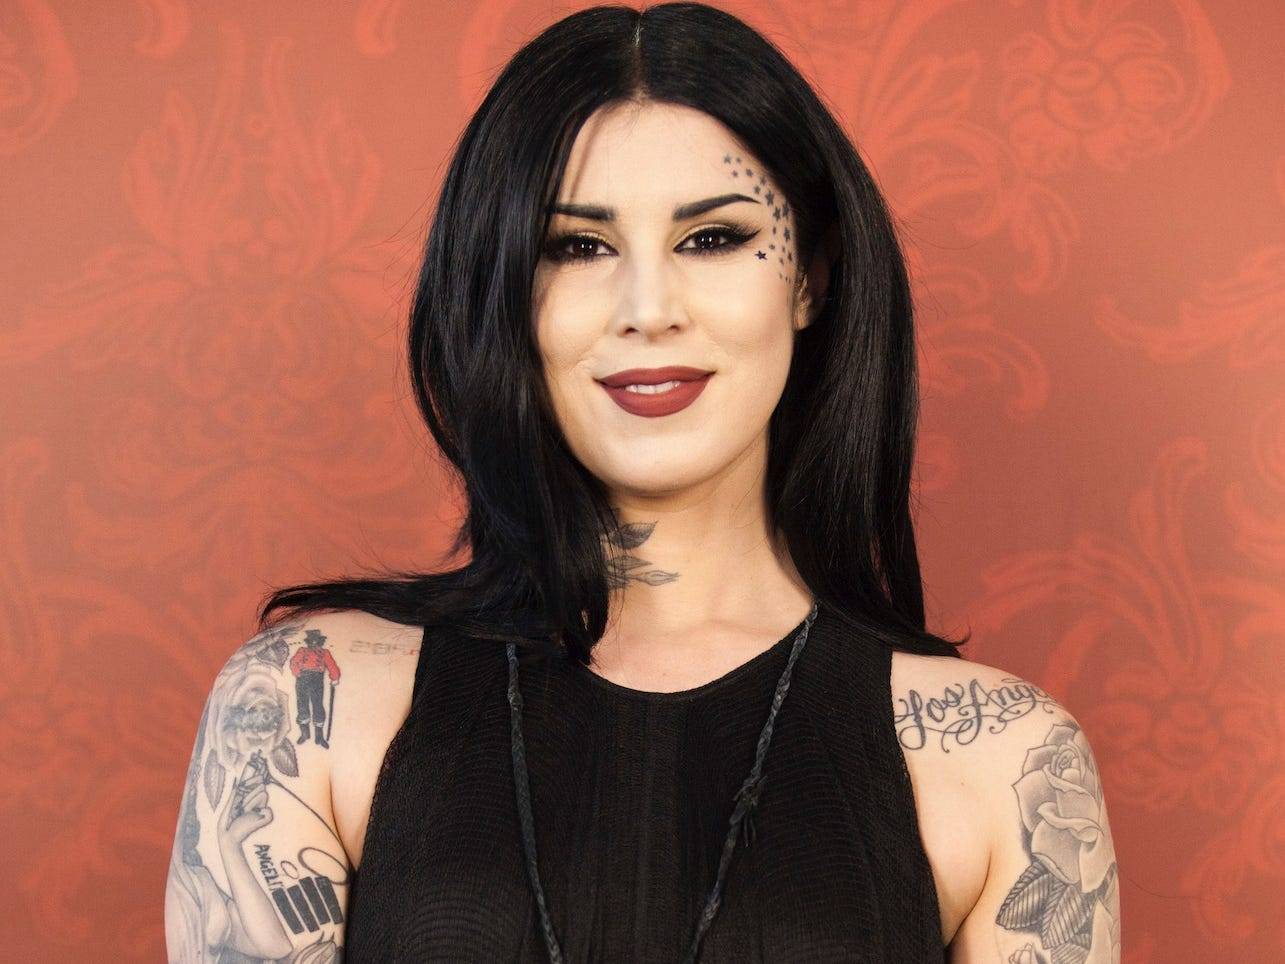 Kat Von D says she bought a second home as an escape from California's